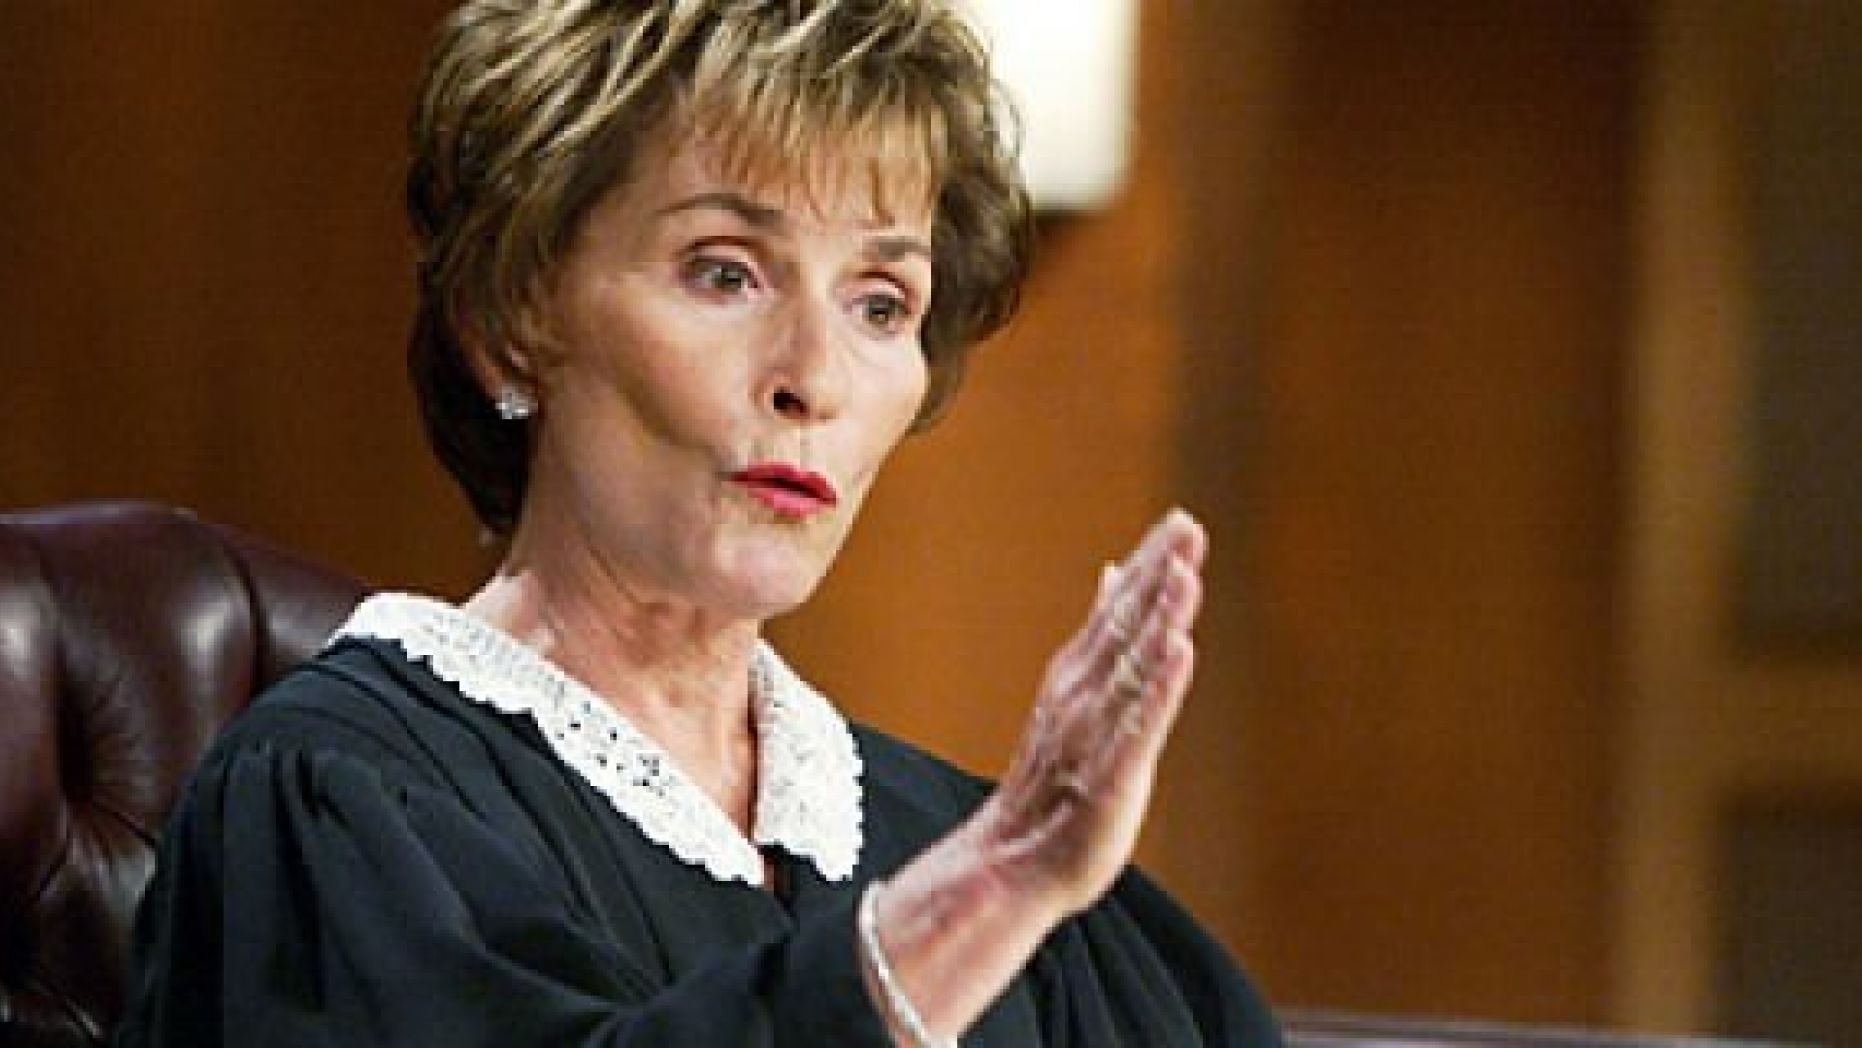 Judge Judy Show Will End After 25th Season